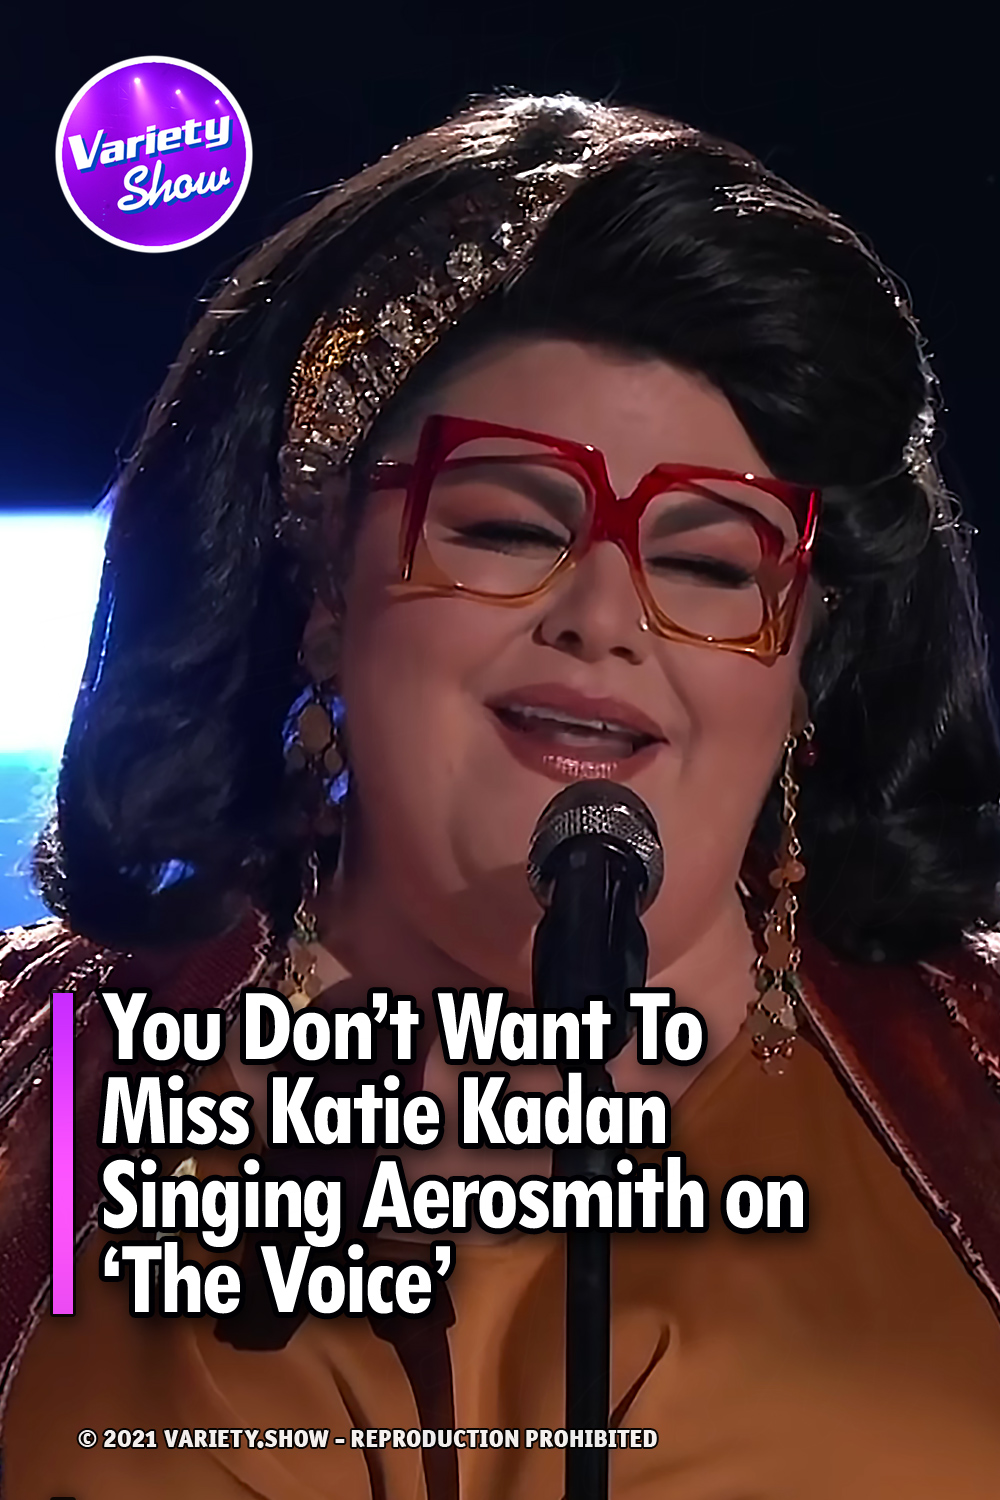 You Don’t Want To Miss Katie Kadan Singing Aerosmith on ‘The Voice’